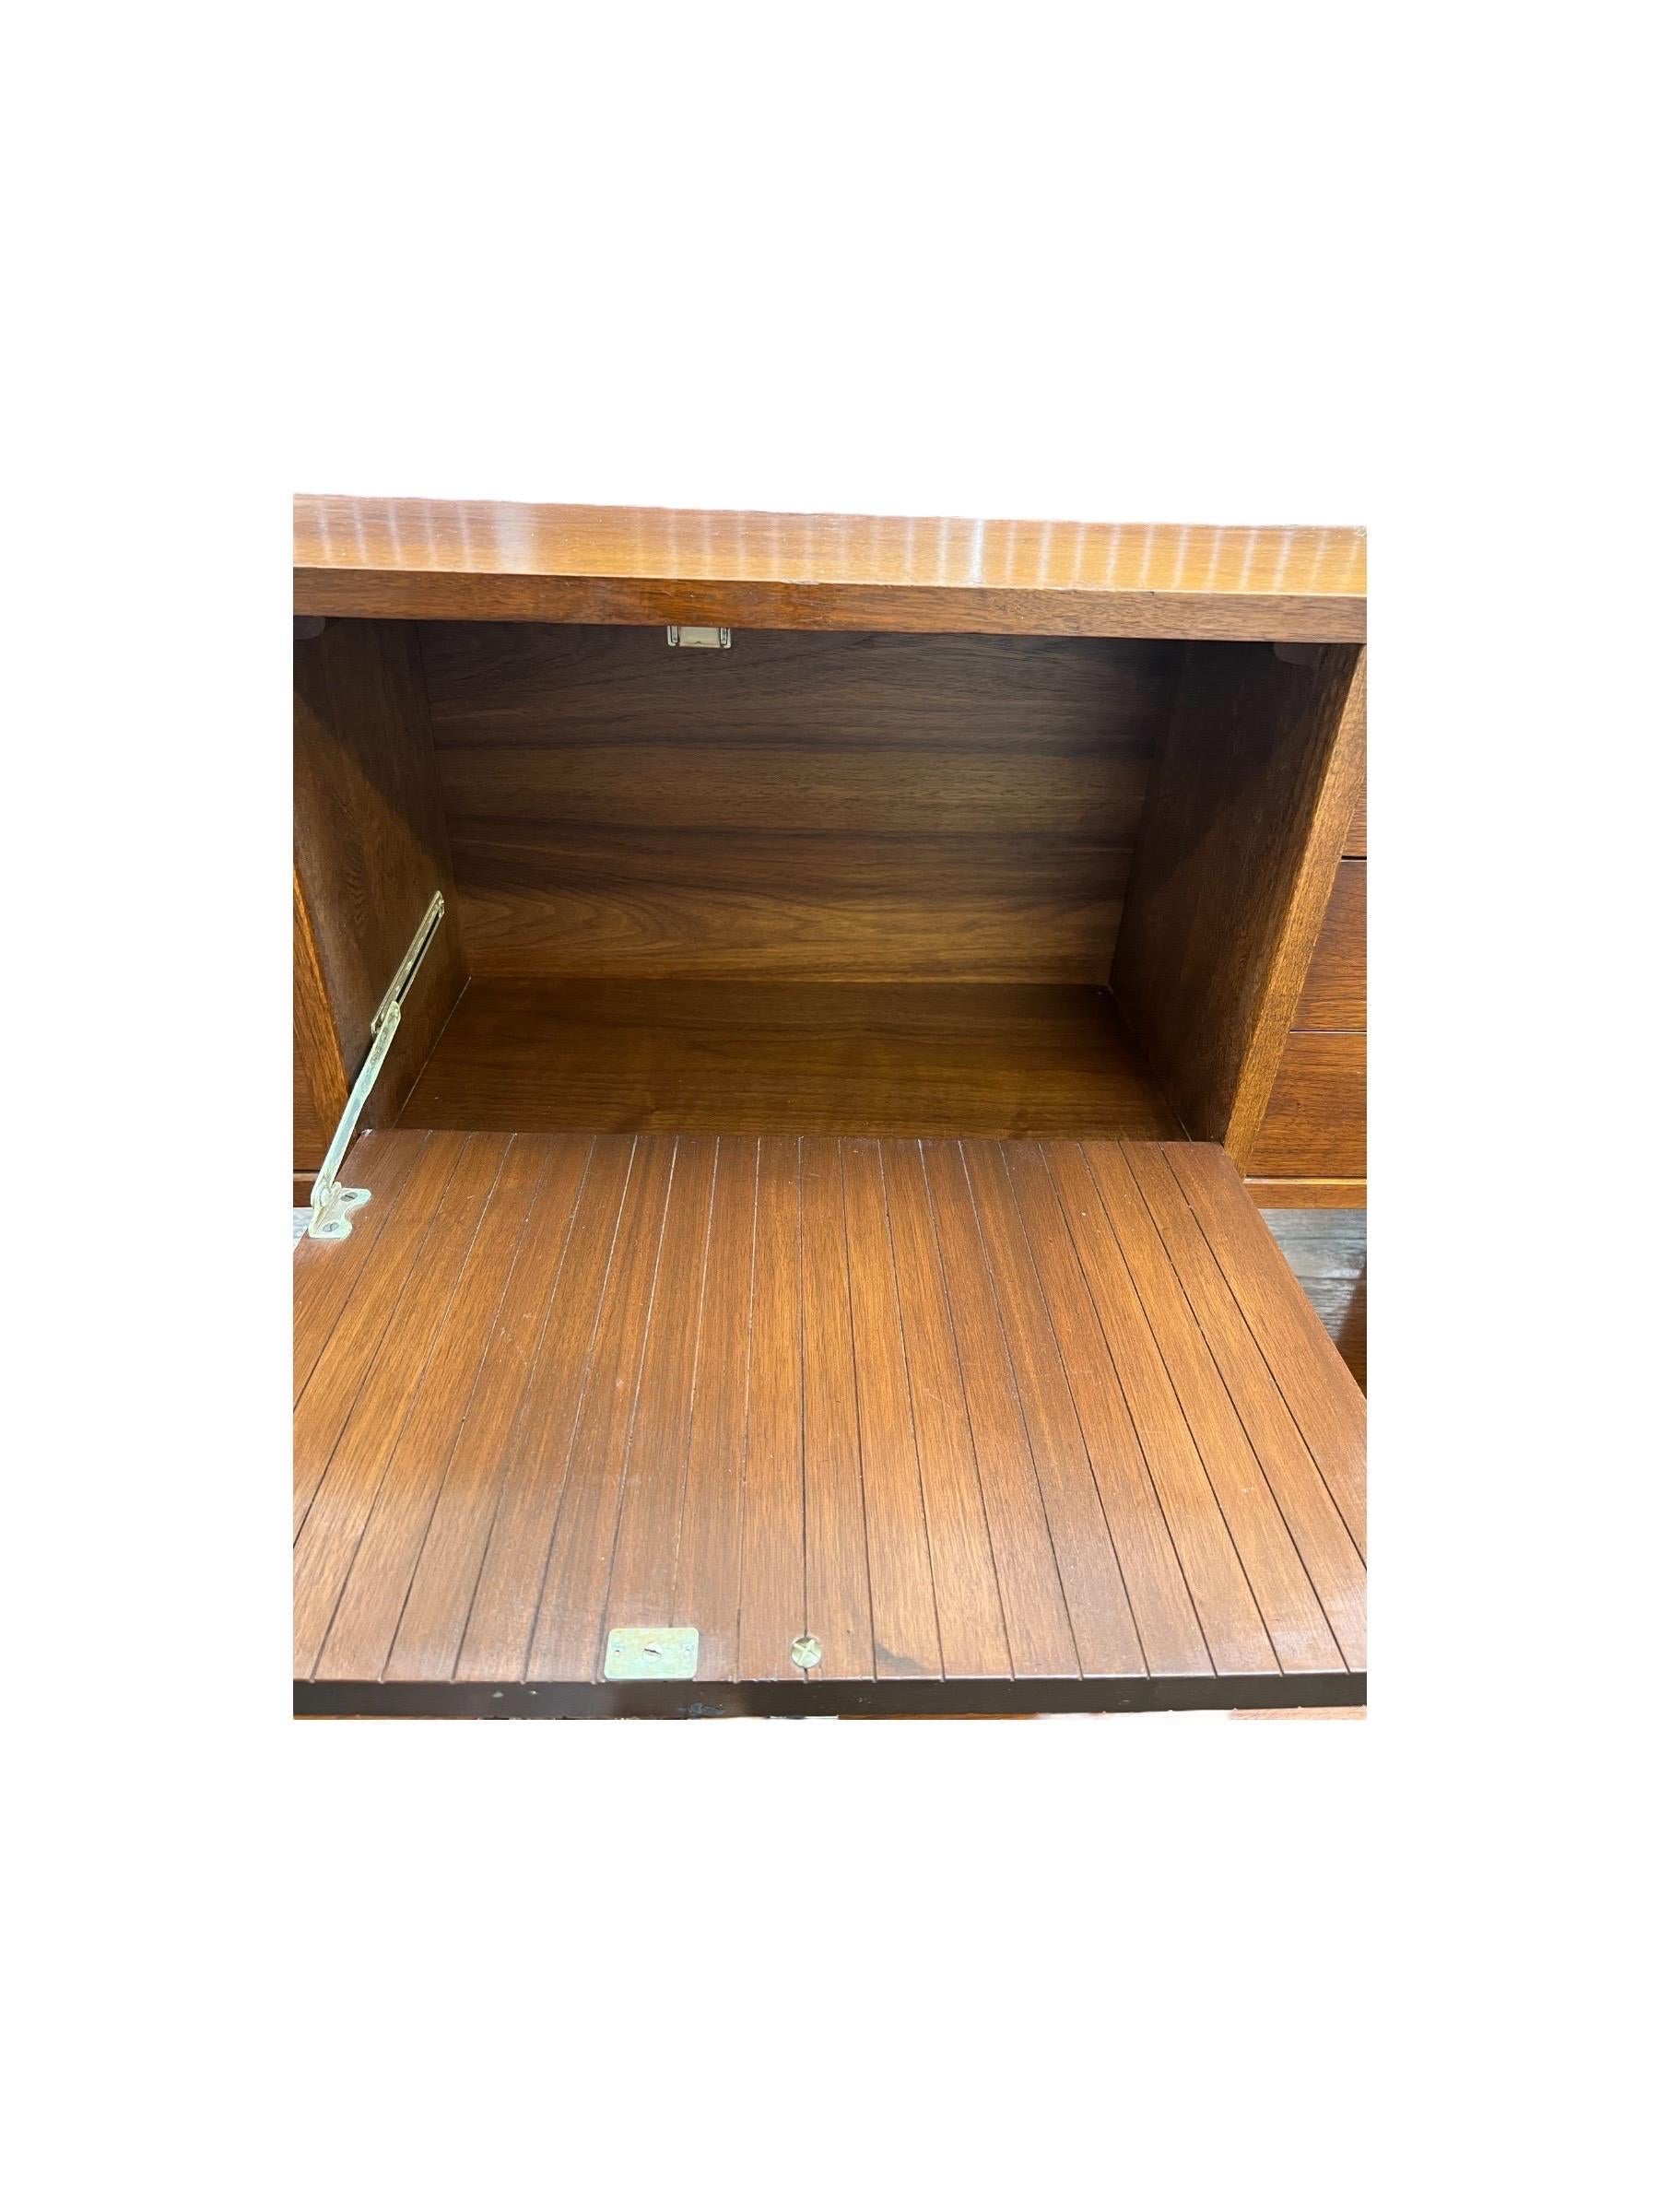 Vintage Mid Century Modern Dresser Dovetailed Drawers Arthur Umanoff 
 In Good Condition For Sale In Seattle, WA